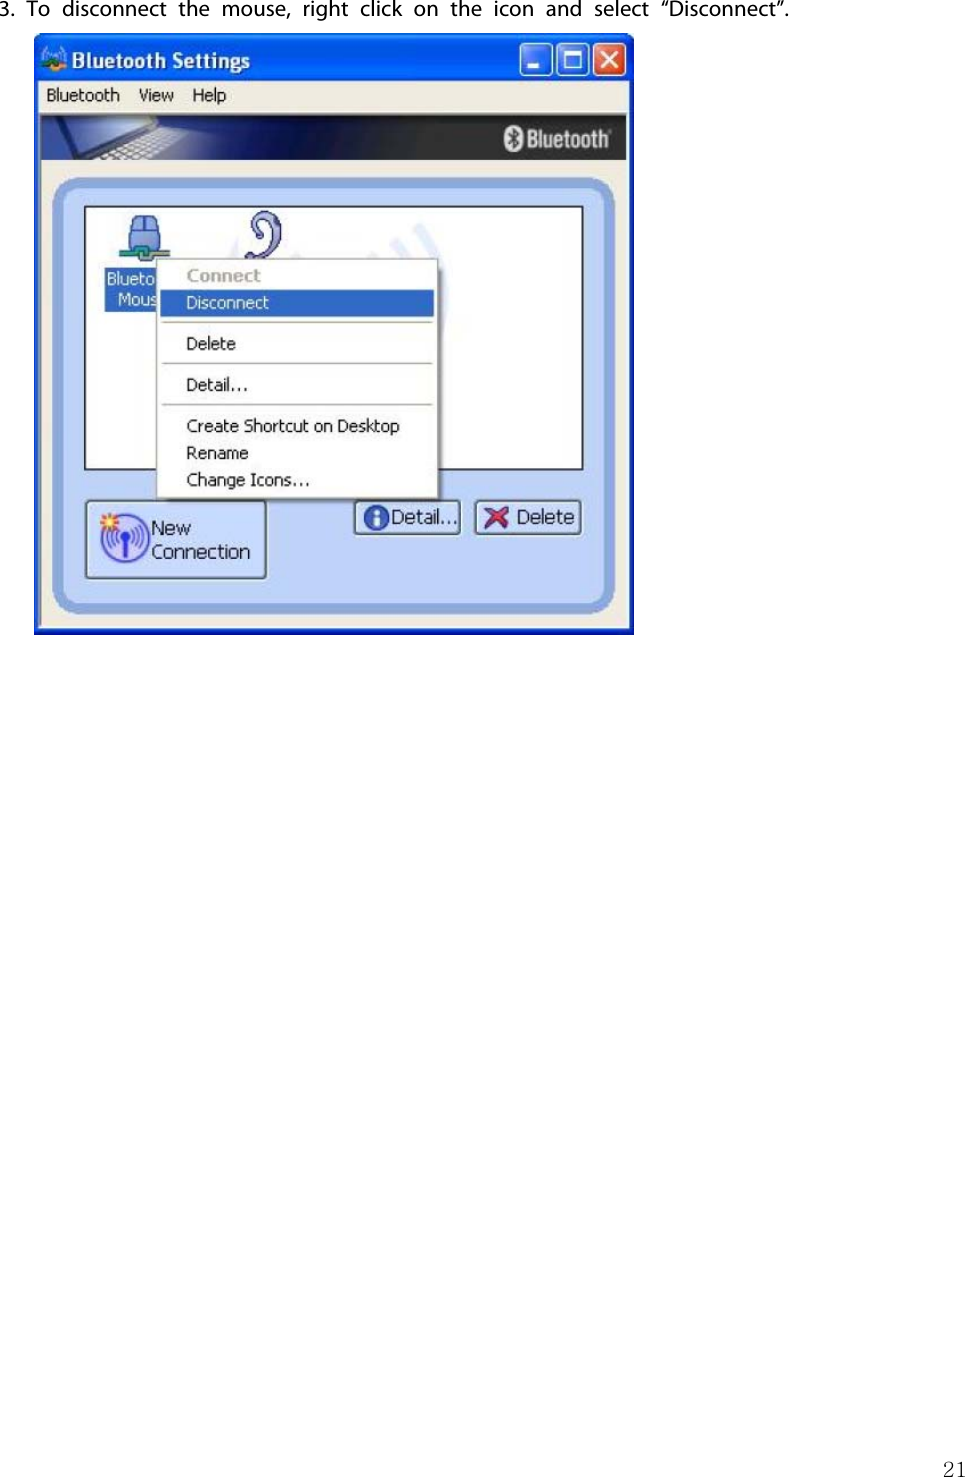 213. To disconnect the mouse, right click on the icon and select “Disconnect”.